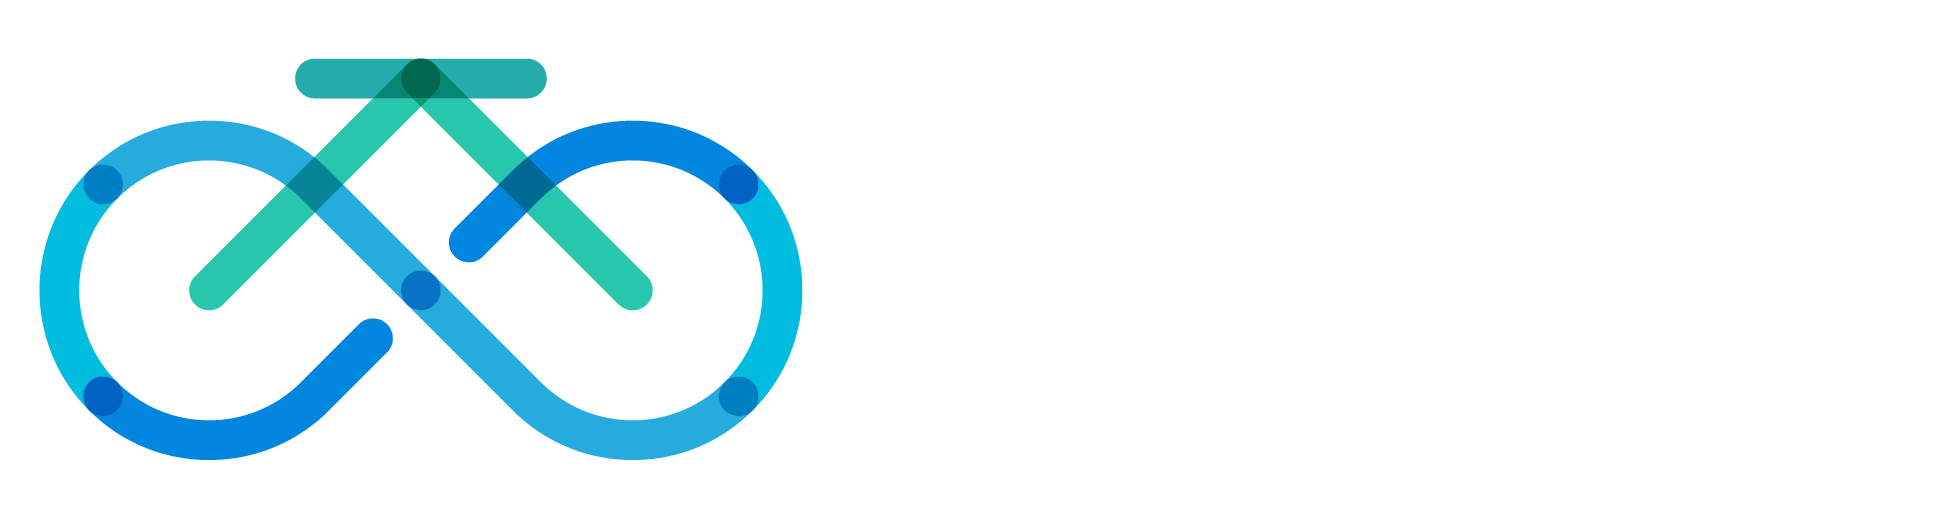 Carbon Cyclists